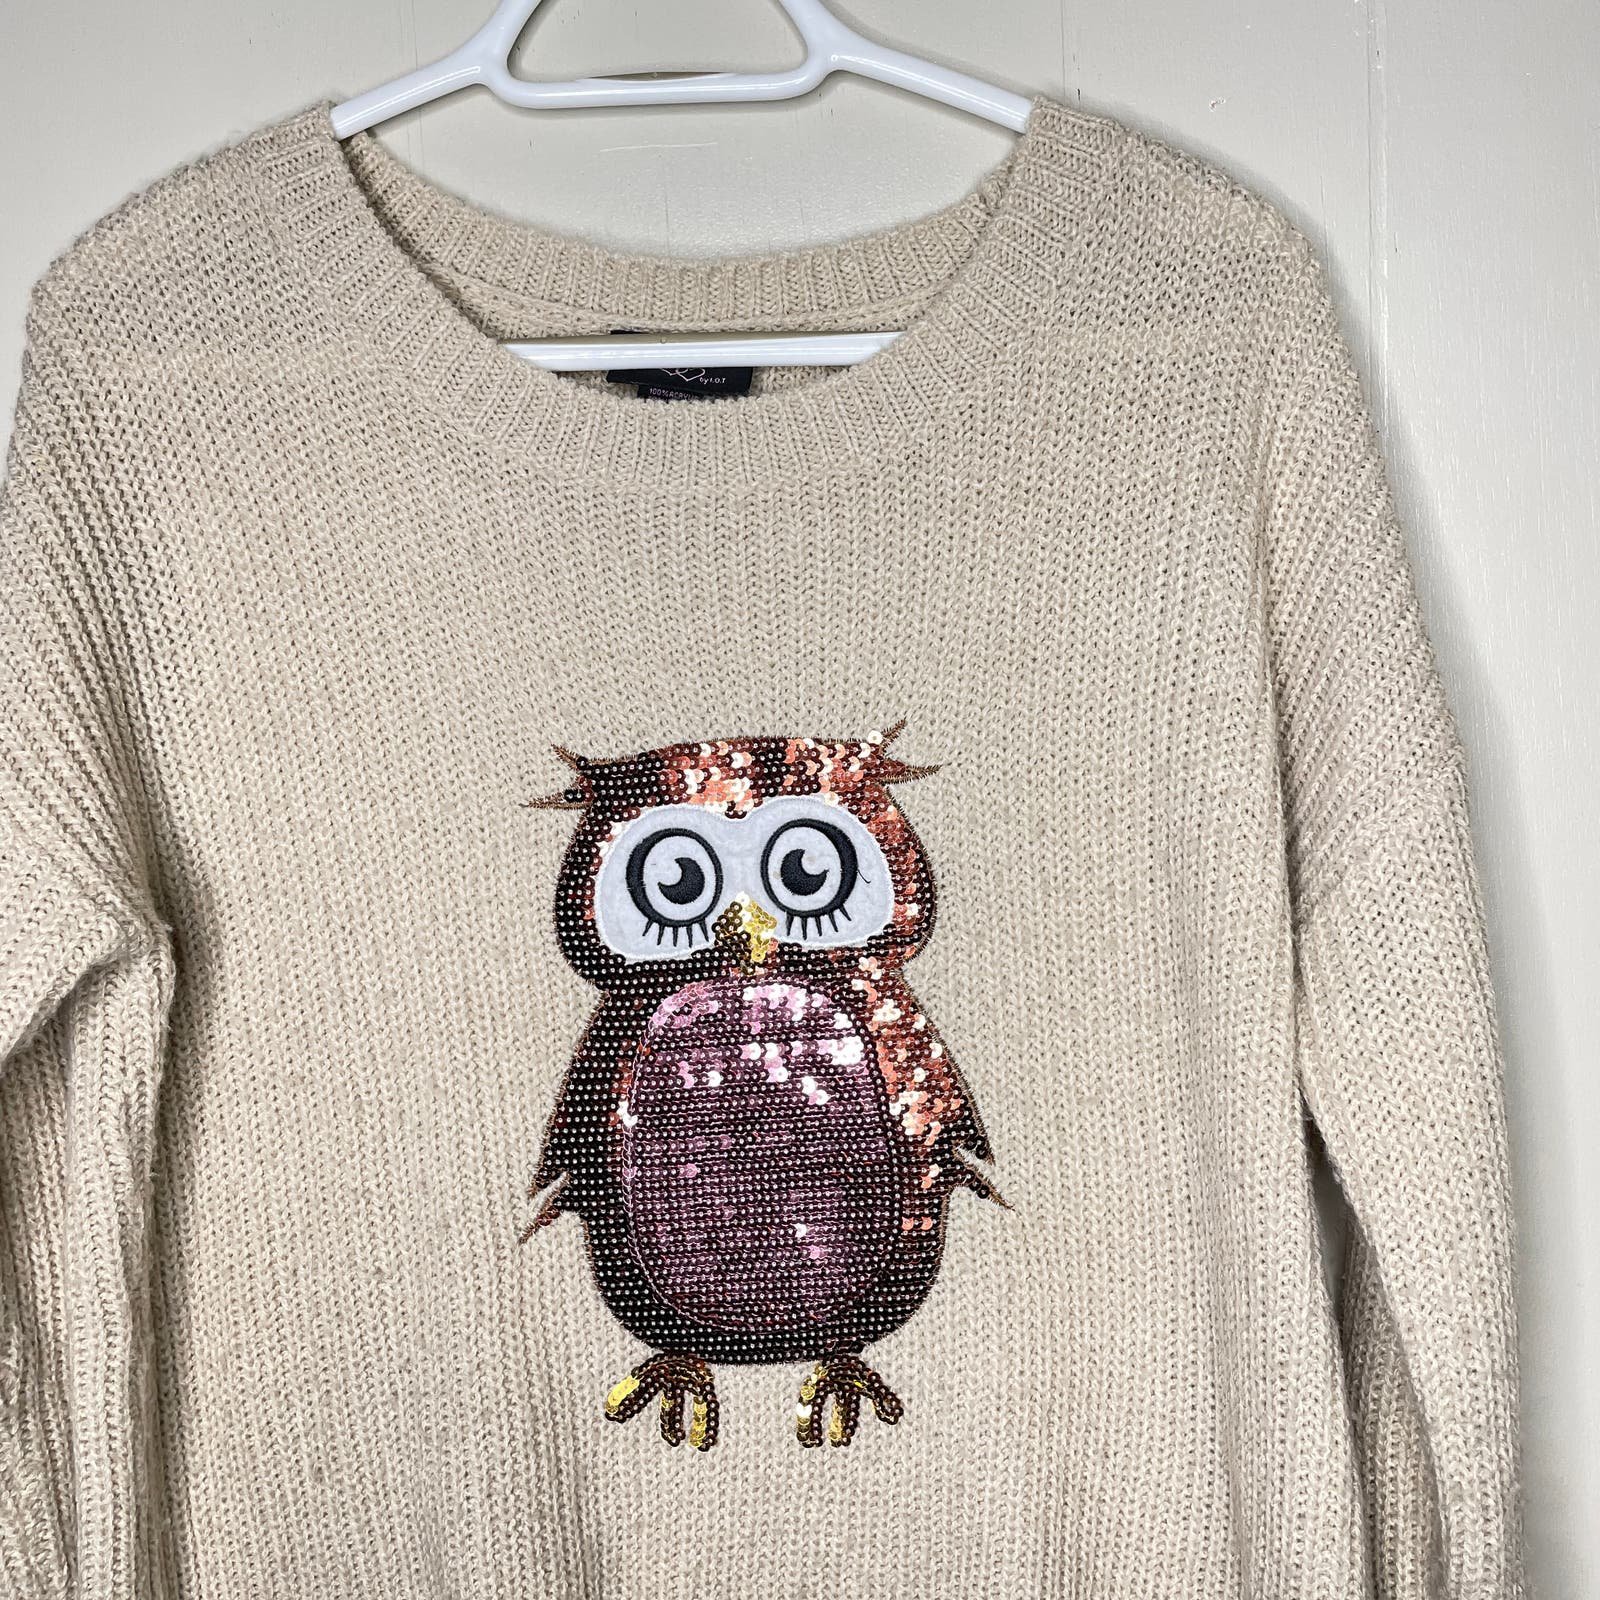 large discount Hooked Up Sequined Owl Tan Chunky Knit Sweater Women´s Size Medium iSMYnlLF7 Cheap